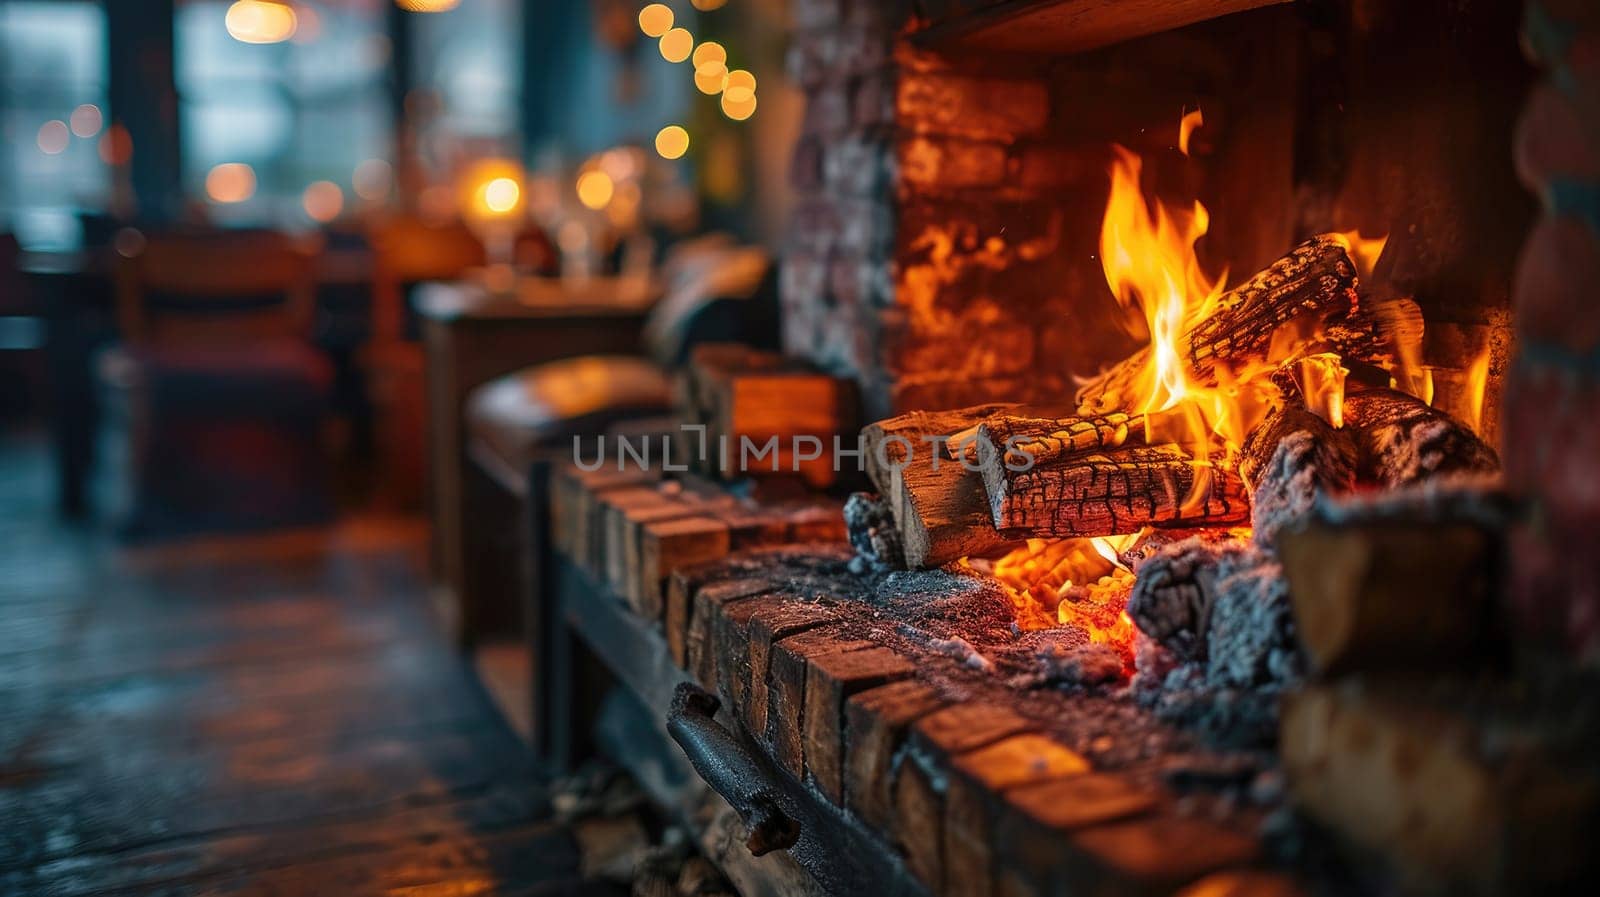 A home fireplace, a symbol of coziness and family warmth for evening gatherings by Yurich32